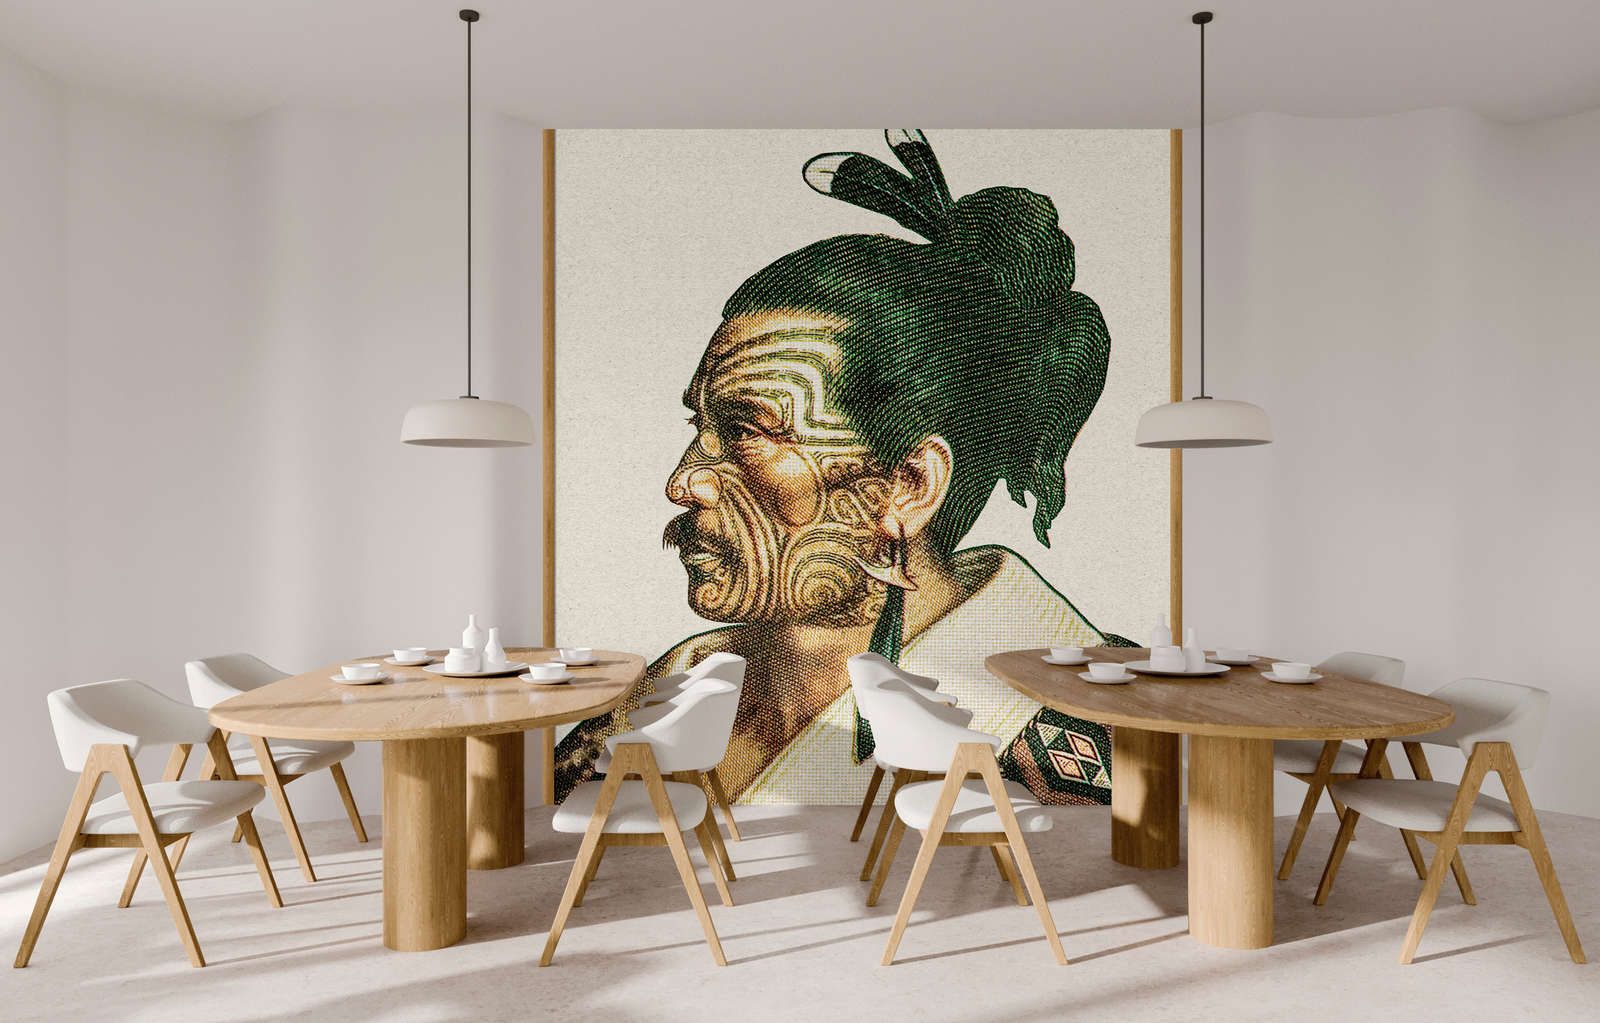             Photo wallpaper »horishi« - African portrait in pixel style with kraft paper texture - Lightly textured non-woven fabric
        